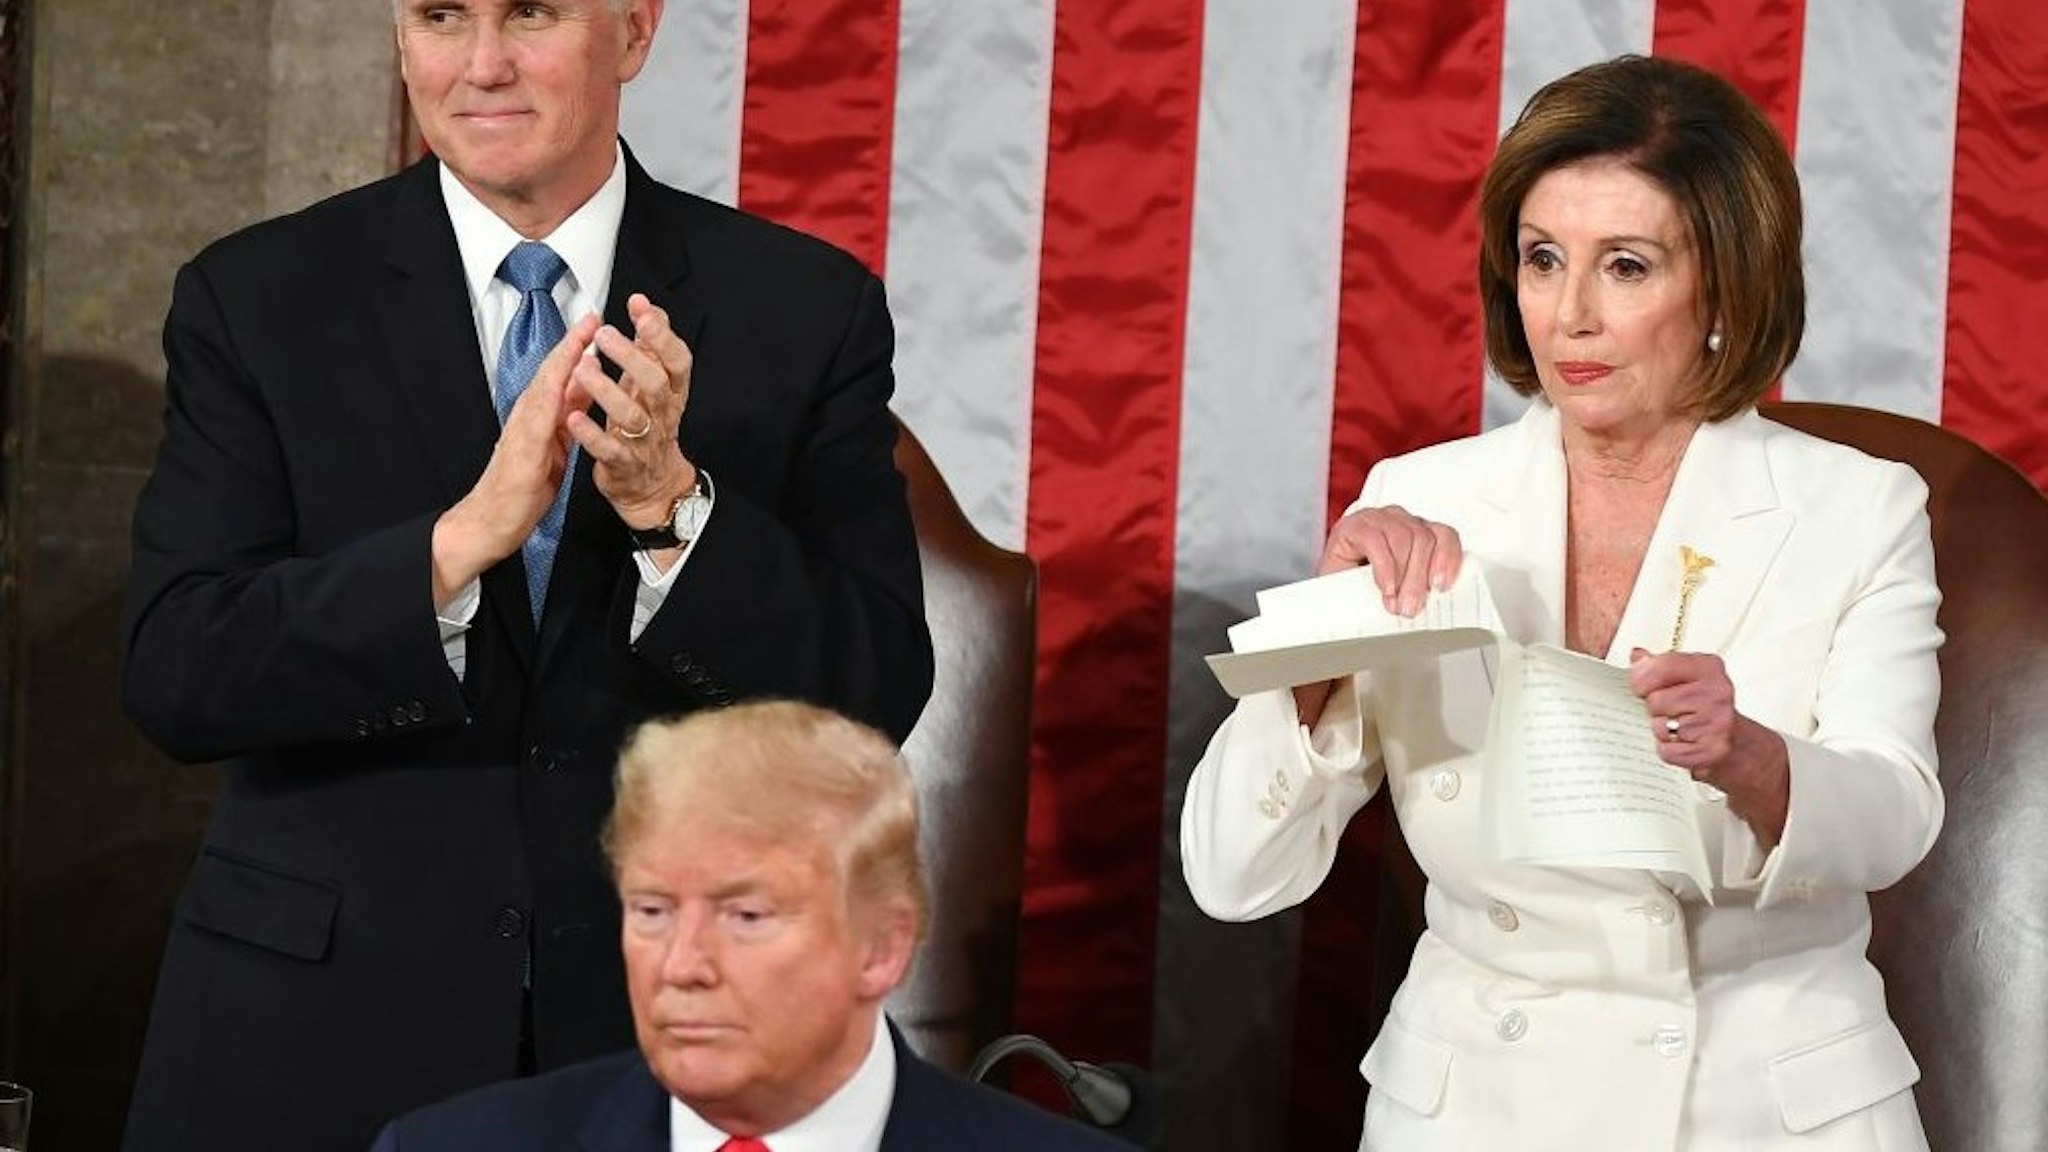 TOPSHOT - Speaker of the US House of Representatives Nancy Pelosi rips a copy of US President Donald Trumps speech after he delivered the State of the Union address at the US Capitol in Washington, DC, on February 4, 2020. (Photo by MANDEL NGAN / AFP) (Photo by